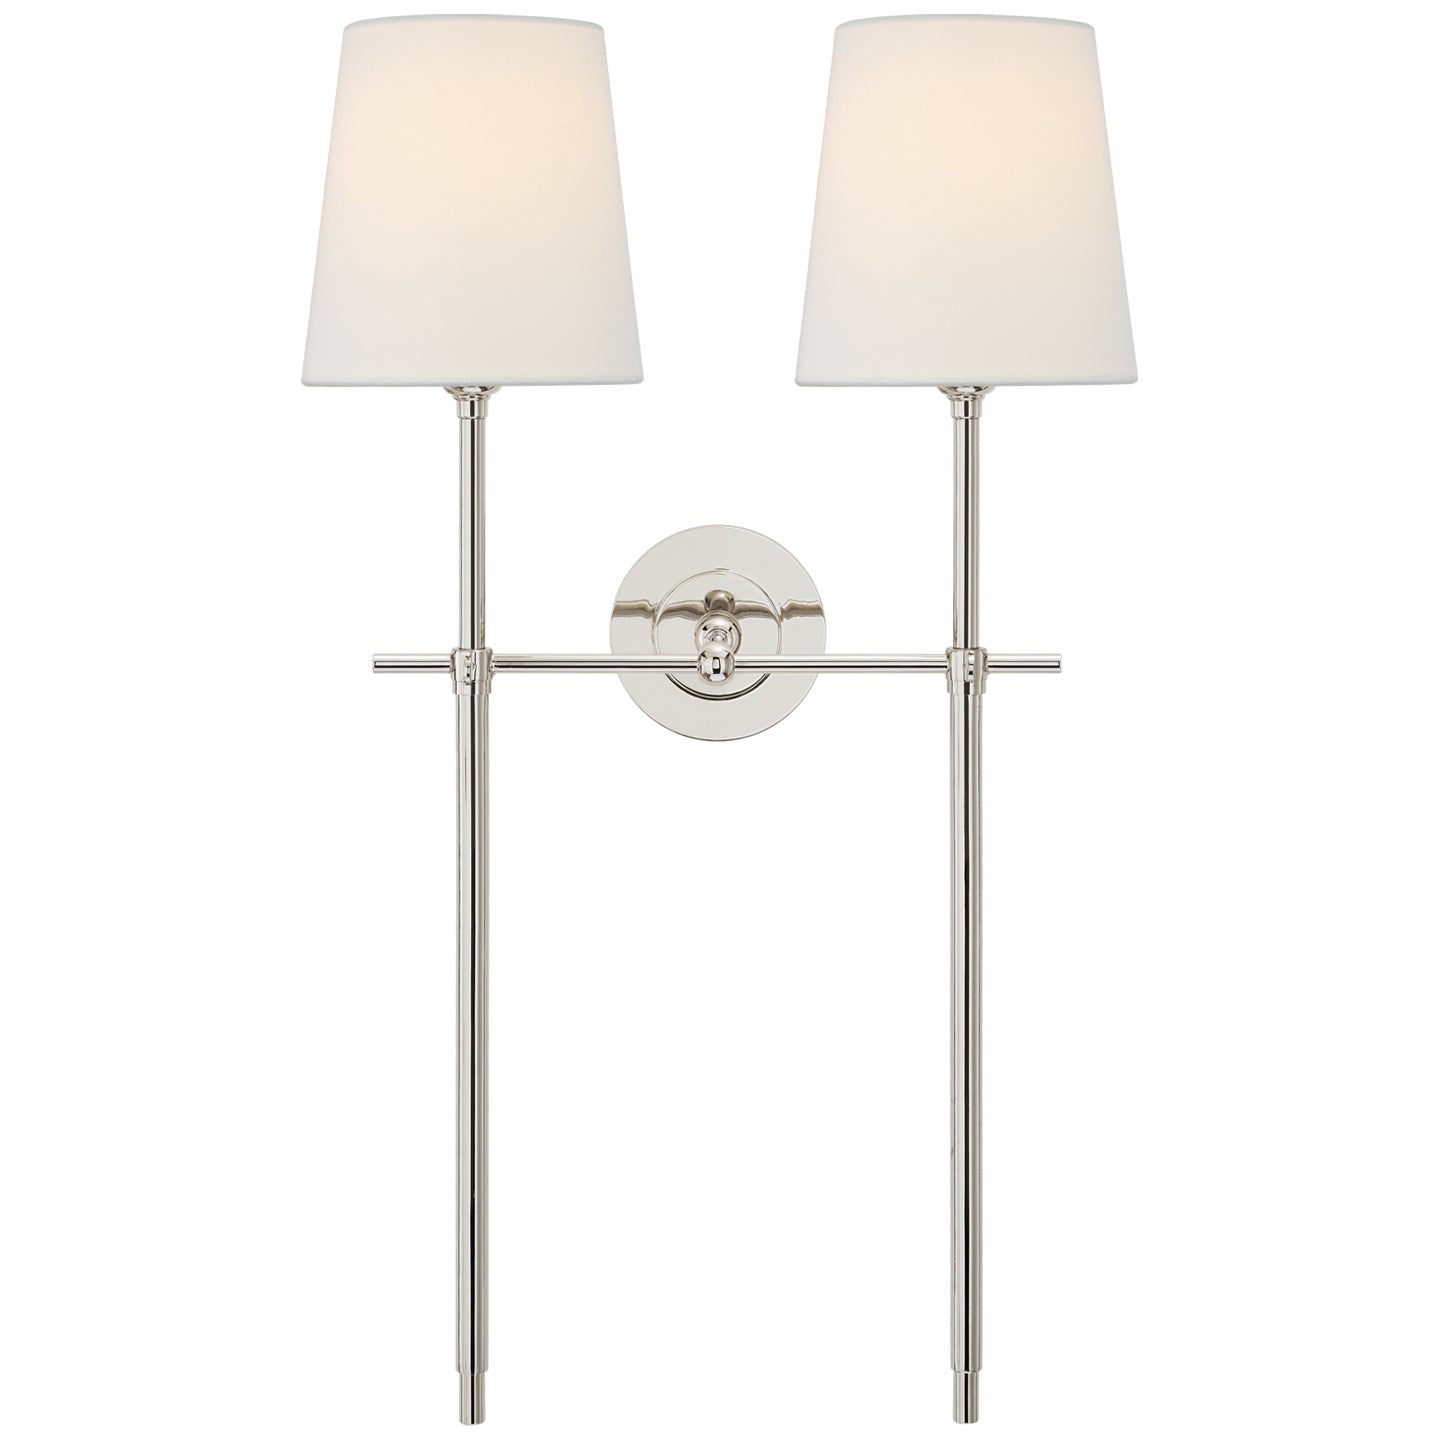 Visual Comfort Signature - TOB 2025PN-L - Two Light Wall Sconce - Bryant - Polished Nickel